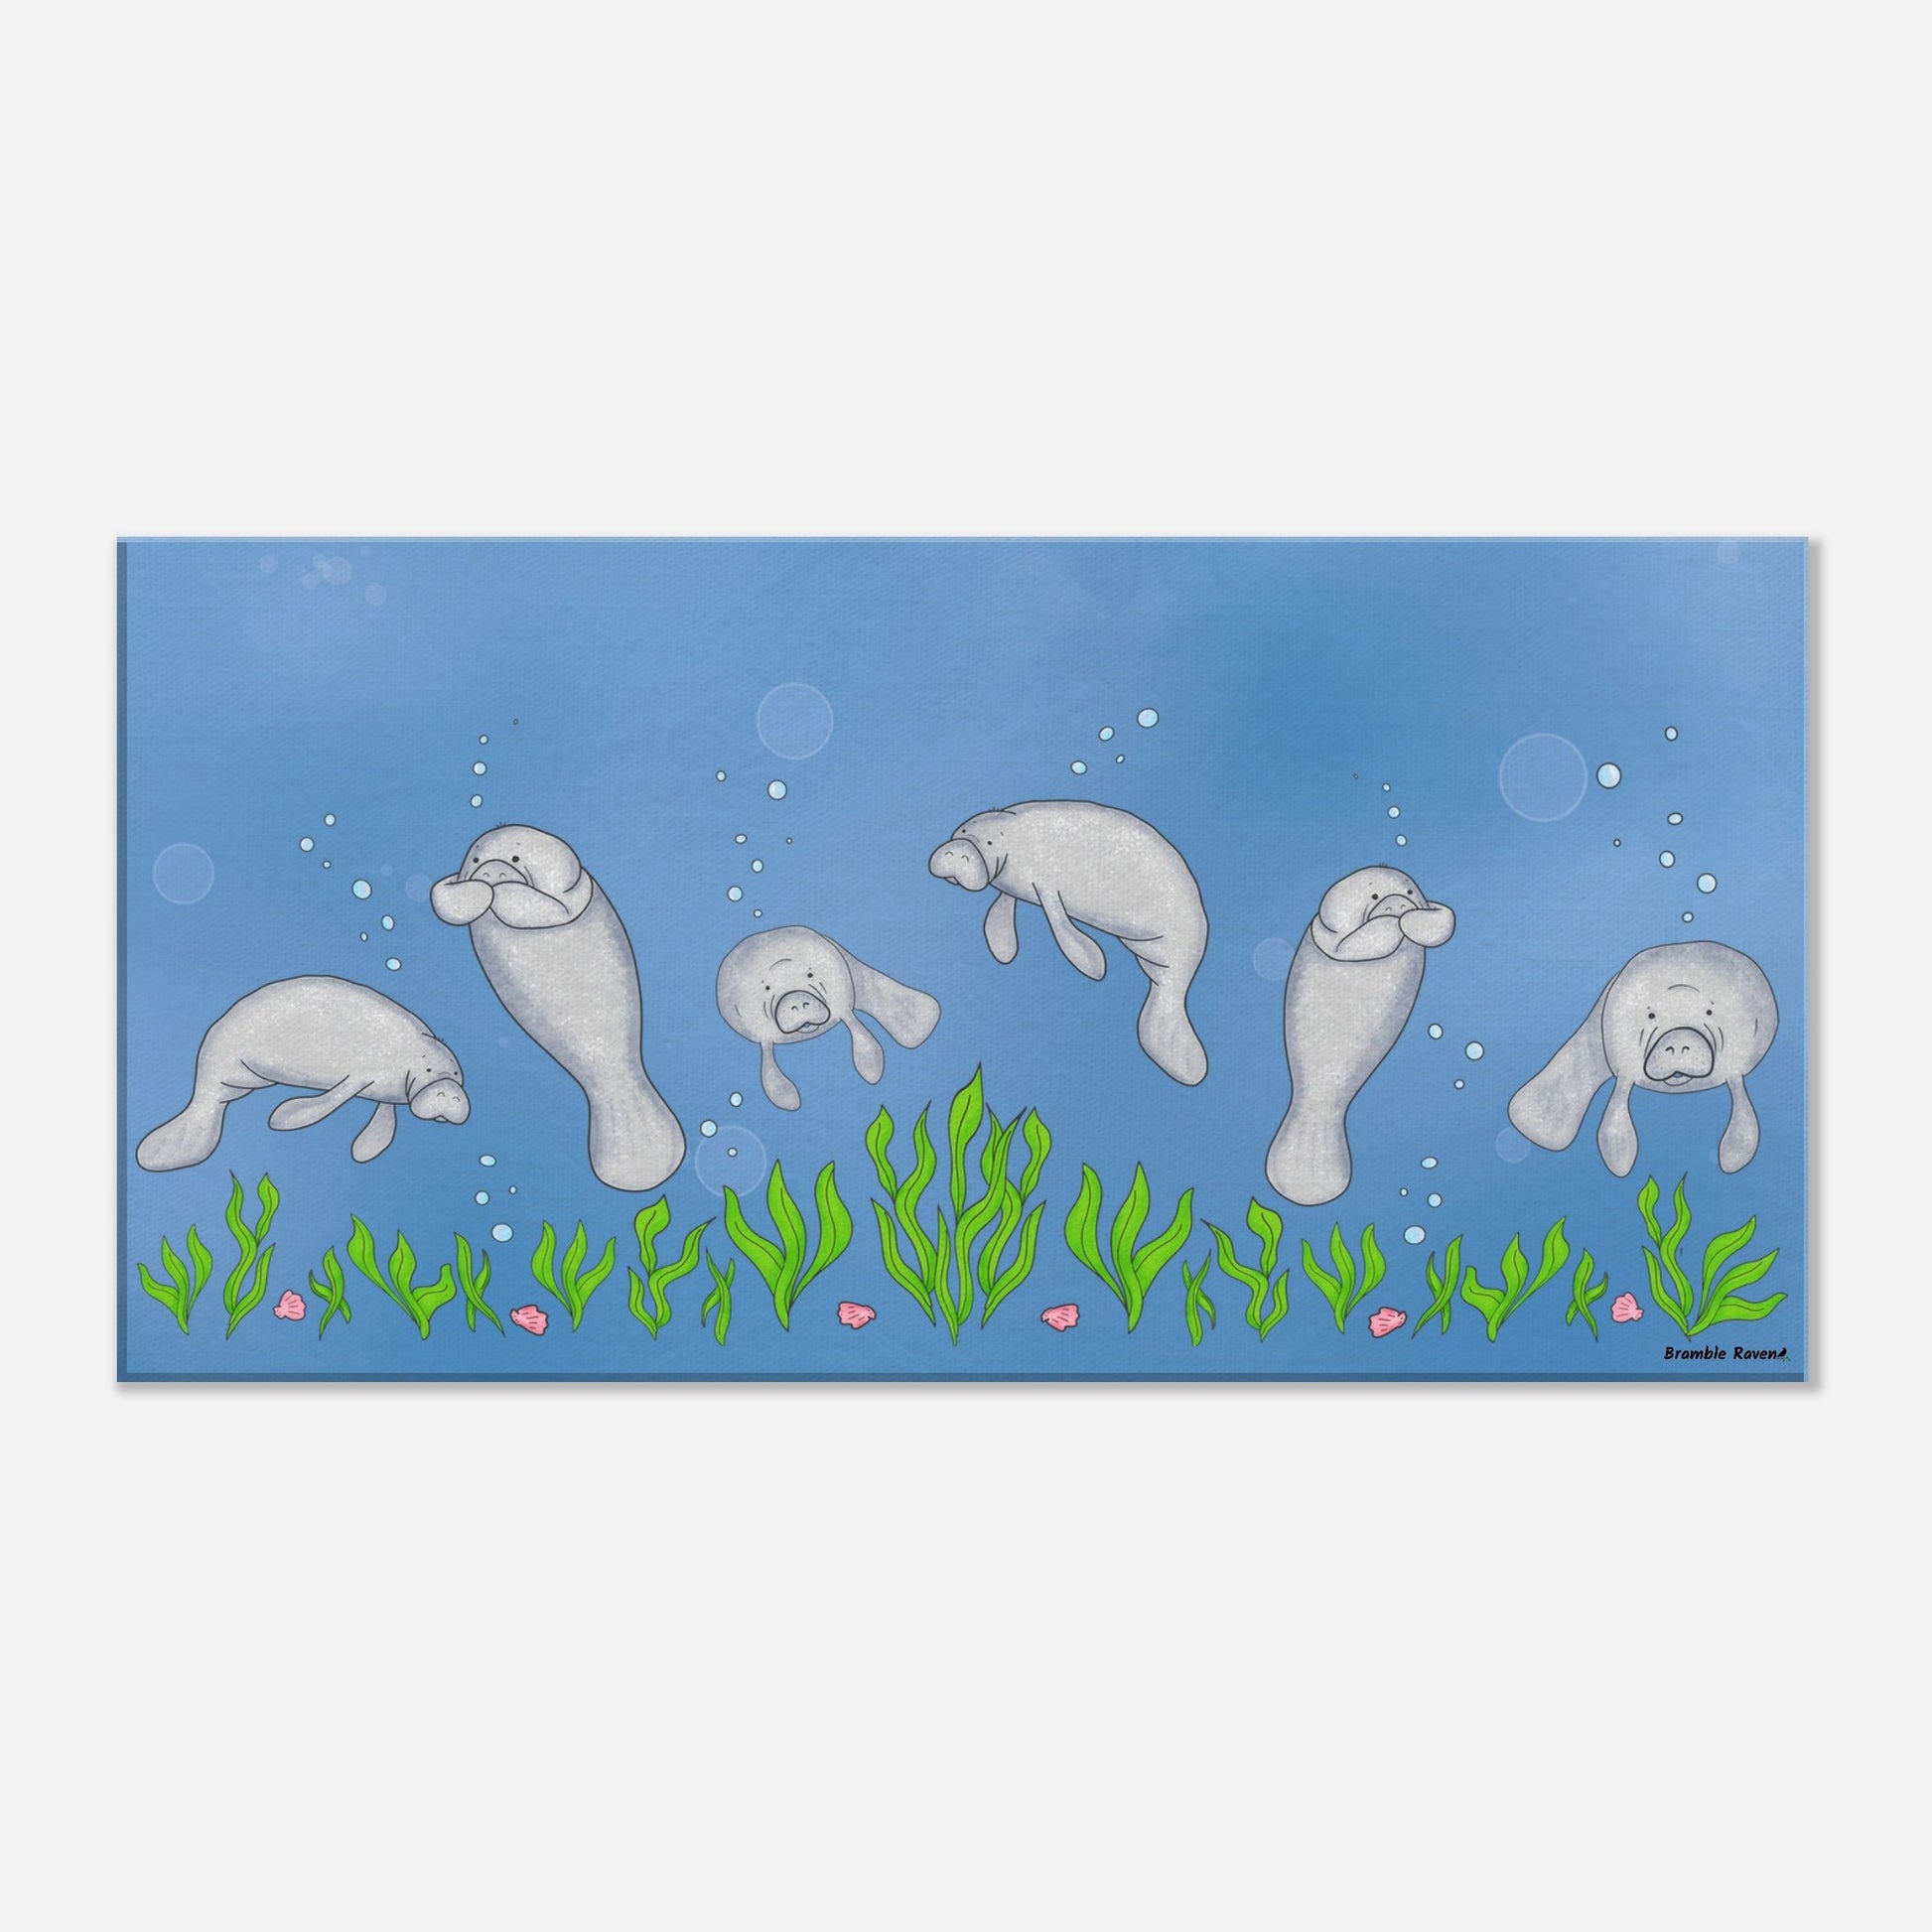 20 by 40 inch slim canvas wall art print featuring cute illustrated manatees swimming above the seabed. Hanging hardware included.